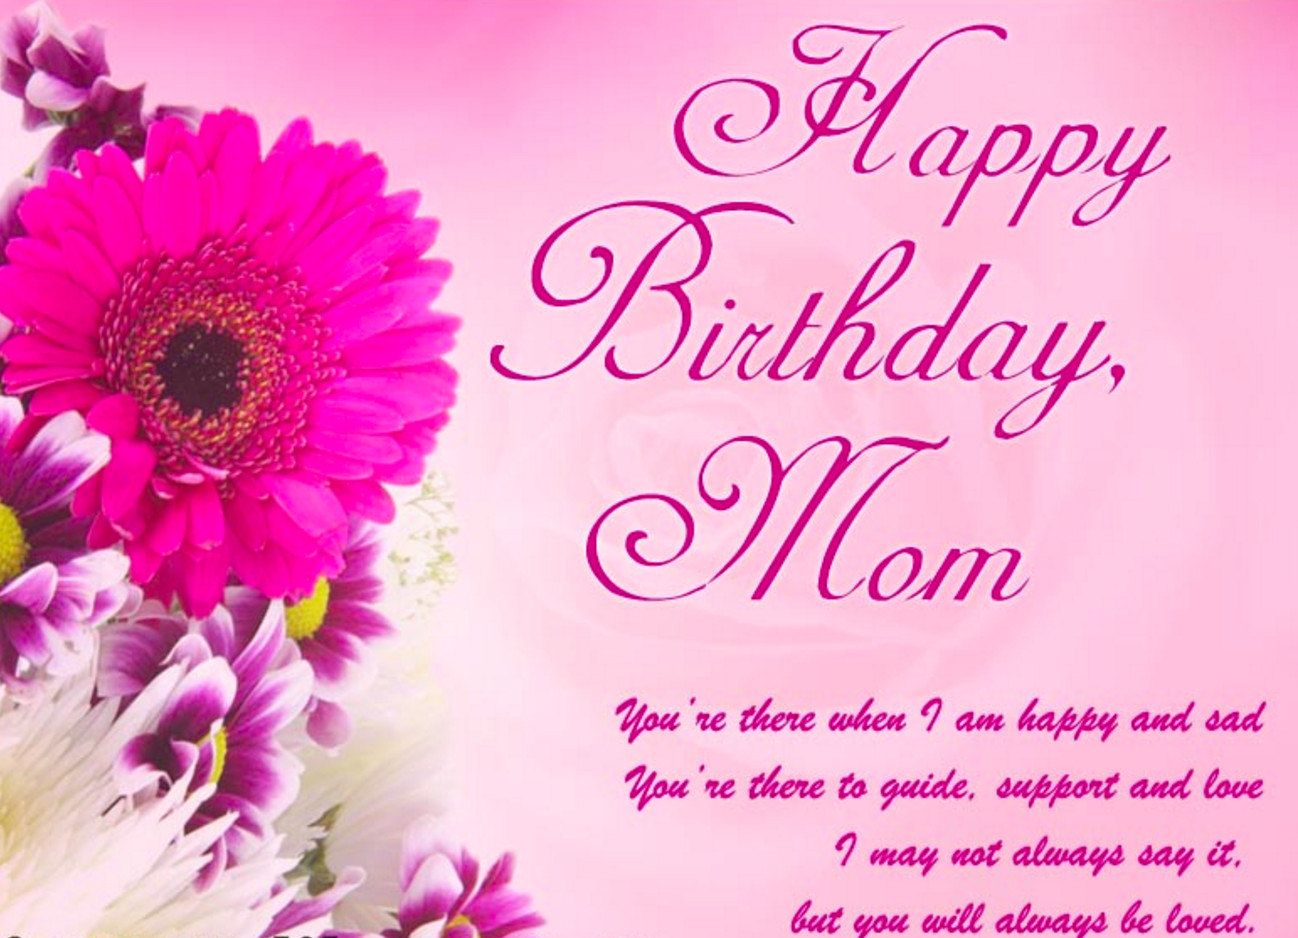 Quotes For Your Mom'S Birthday
 10 Heartfelt Birthday Cards with Quotes to send to your